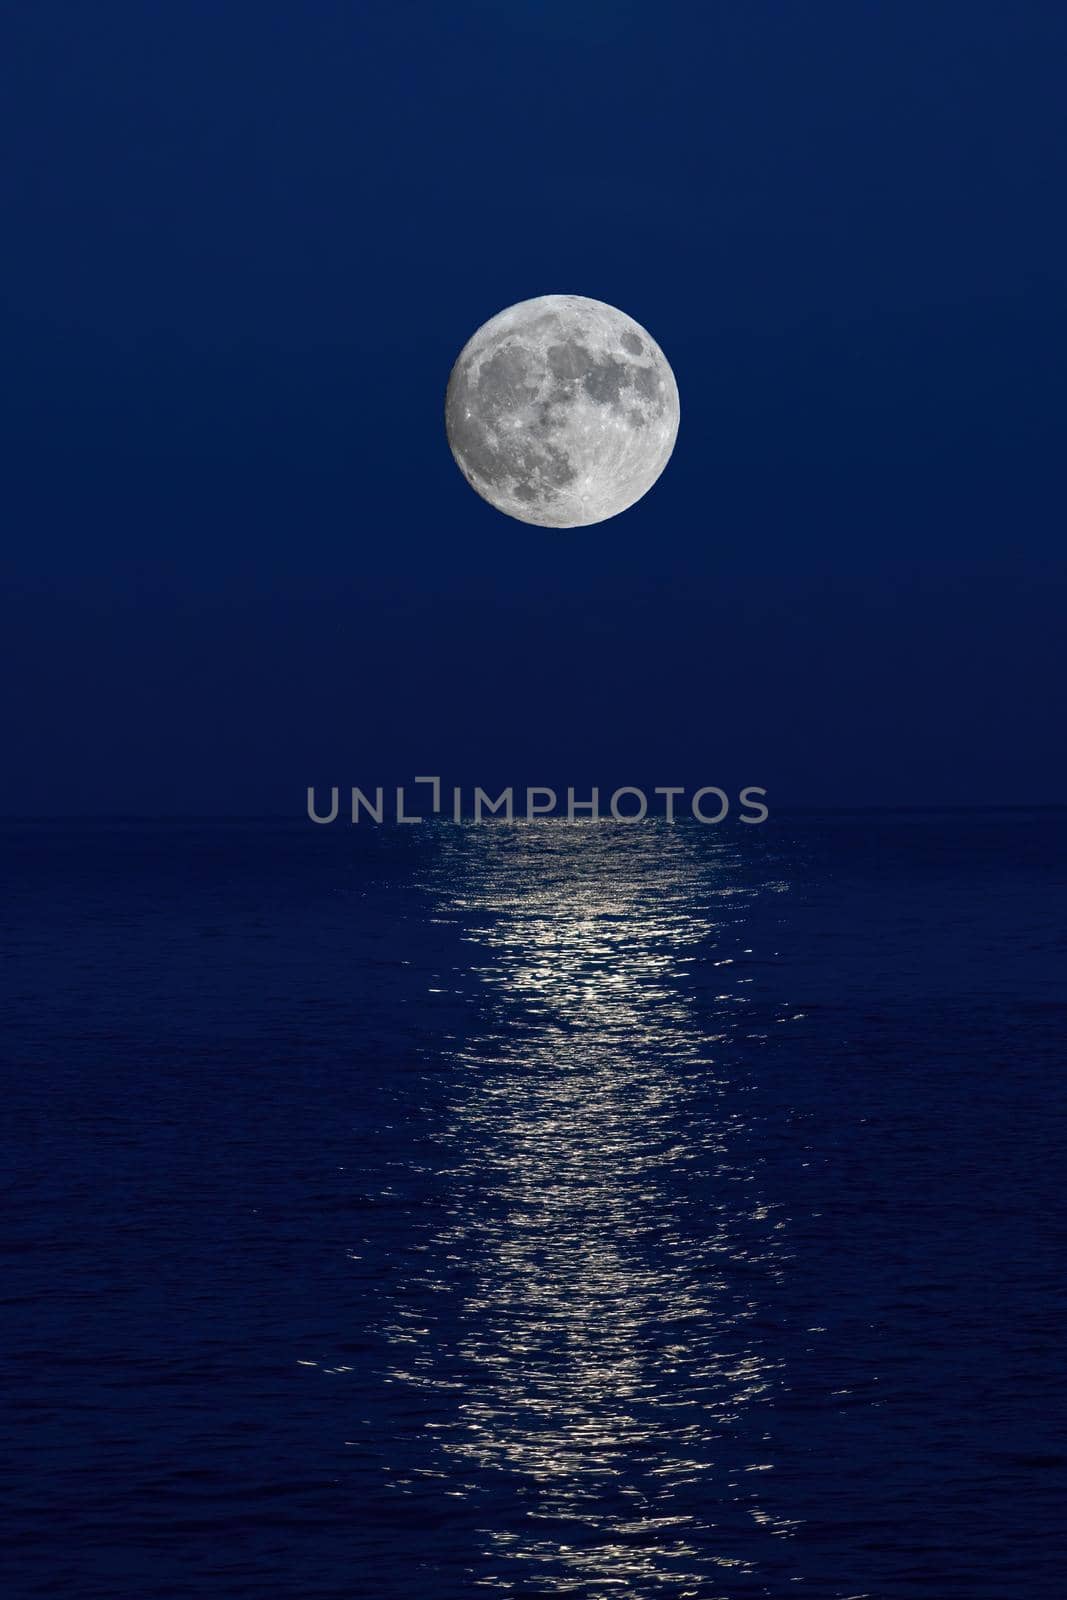 Full moon reflection over the evening sea in Spanish Costa Brava by Digoarpi